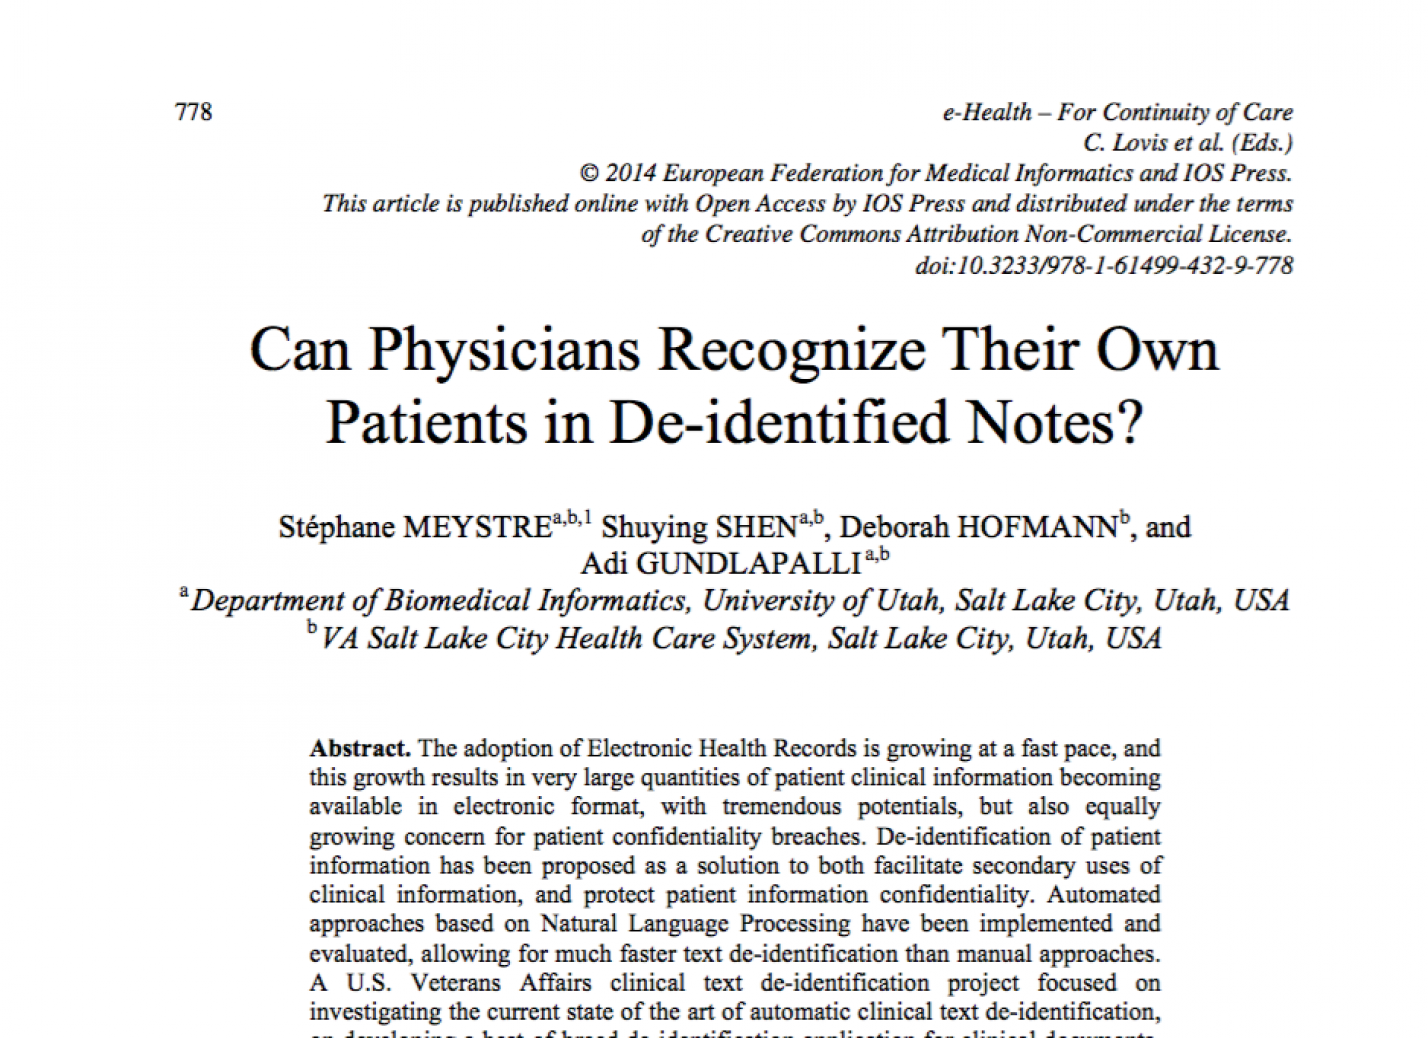 Can Physicians Recognize Their Own Patients in De-identified Notes?